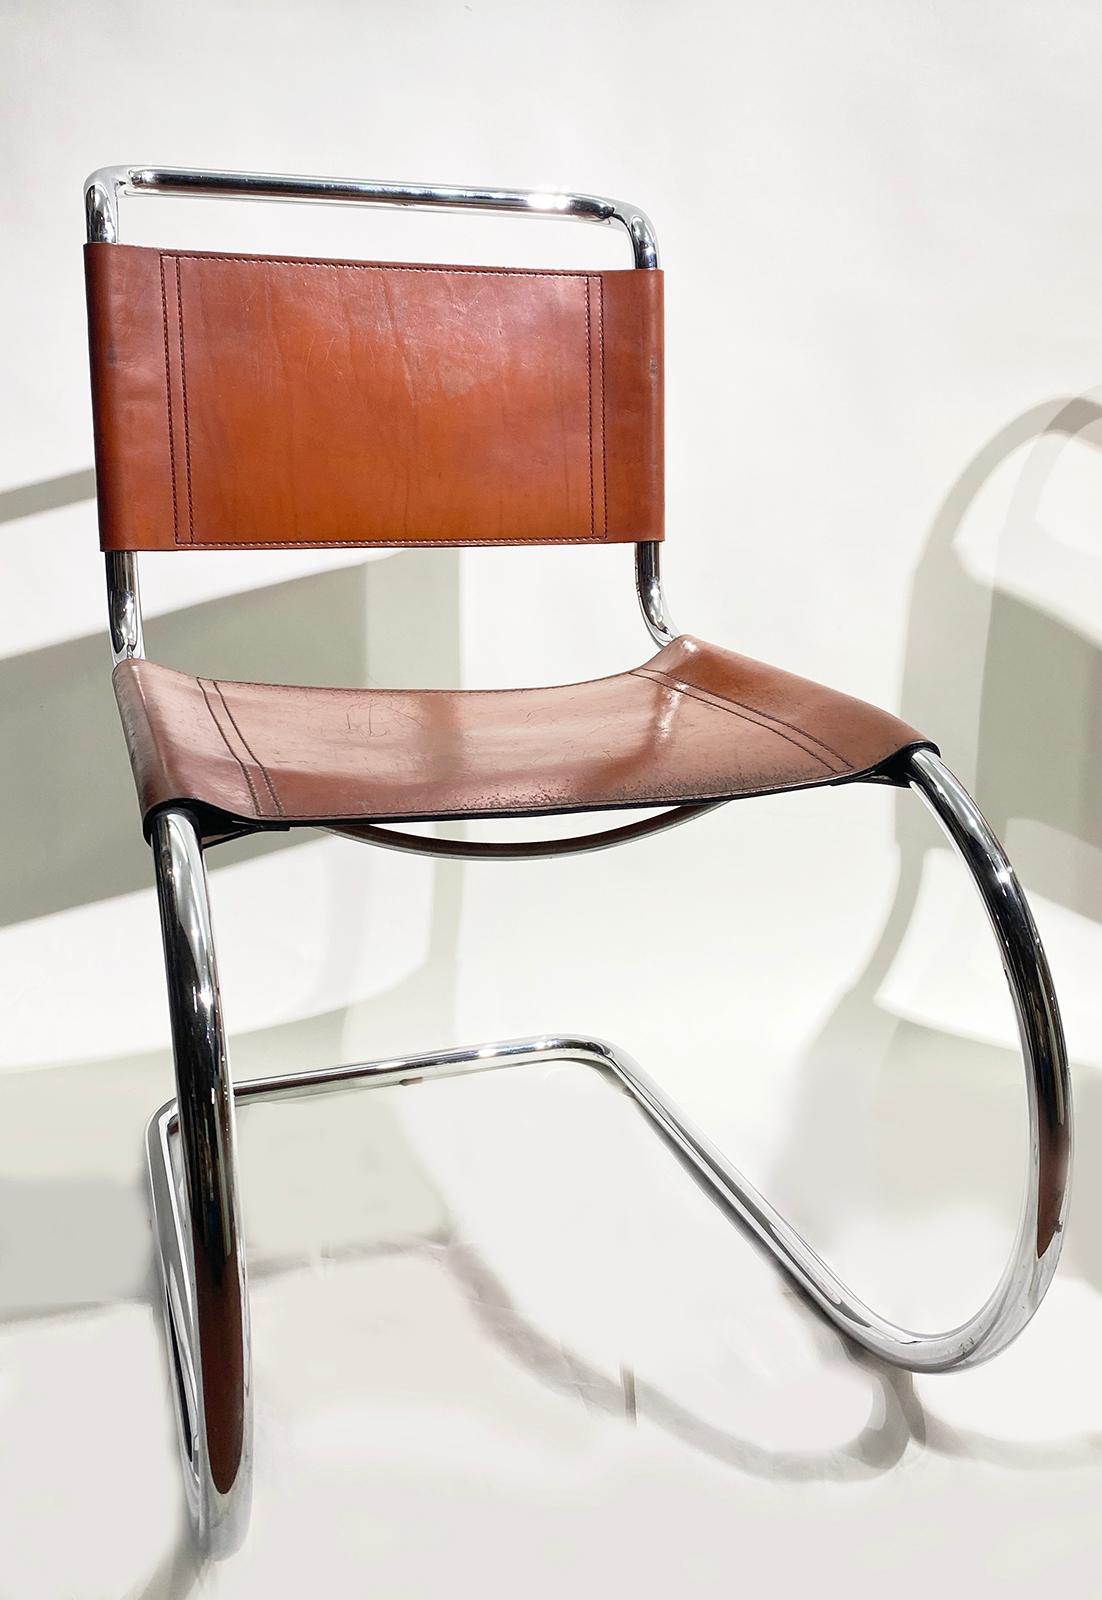 Set of two MR10 cantilever chairs by Ludwig Mies Van der Rohe for Thonet, from the Bauhaus movement.
Curved chrome-plated tubular steel frame, providing flexibility for the entire chair.
Full leather seat and back in cognac brown.
Mies van der